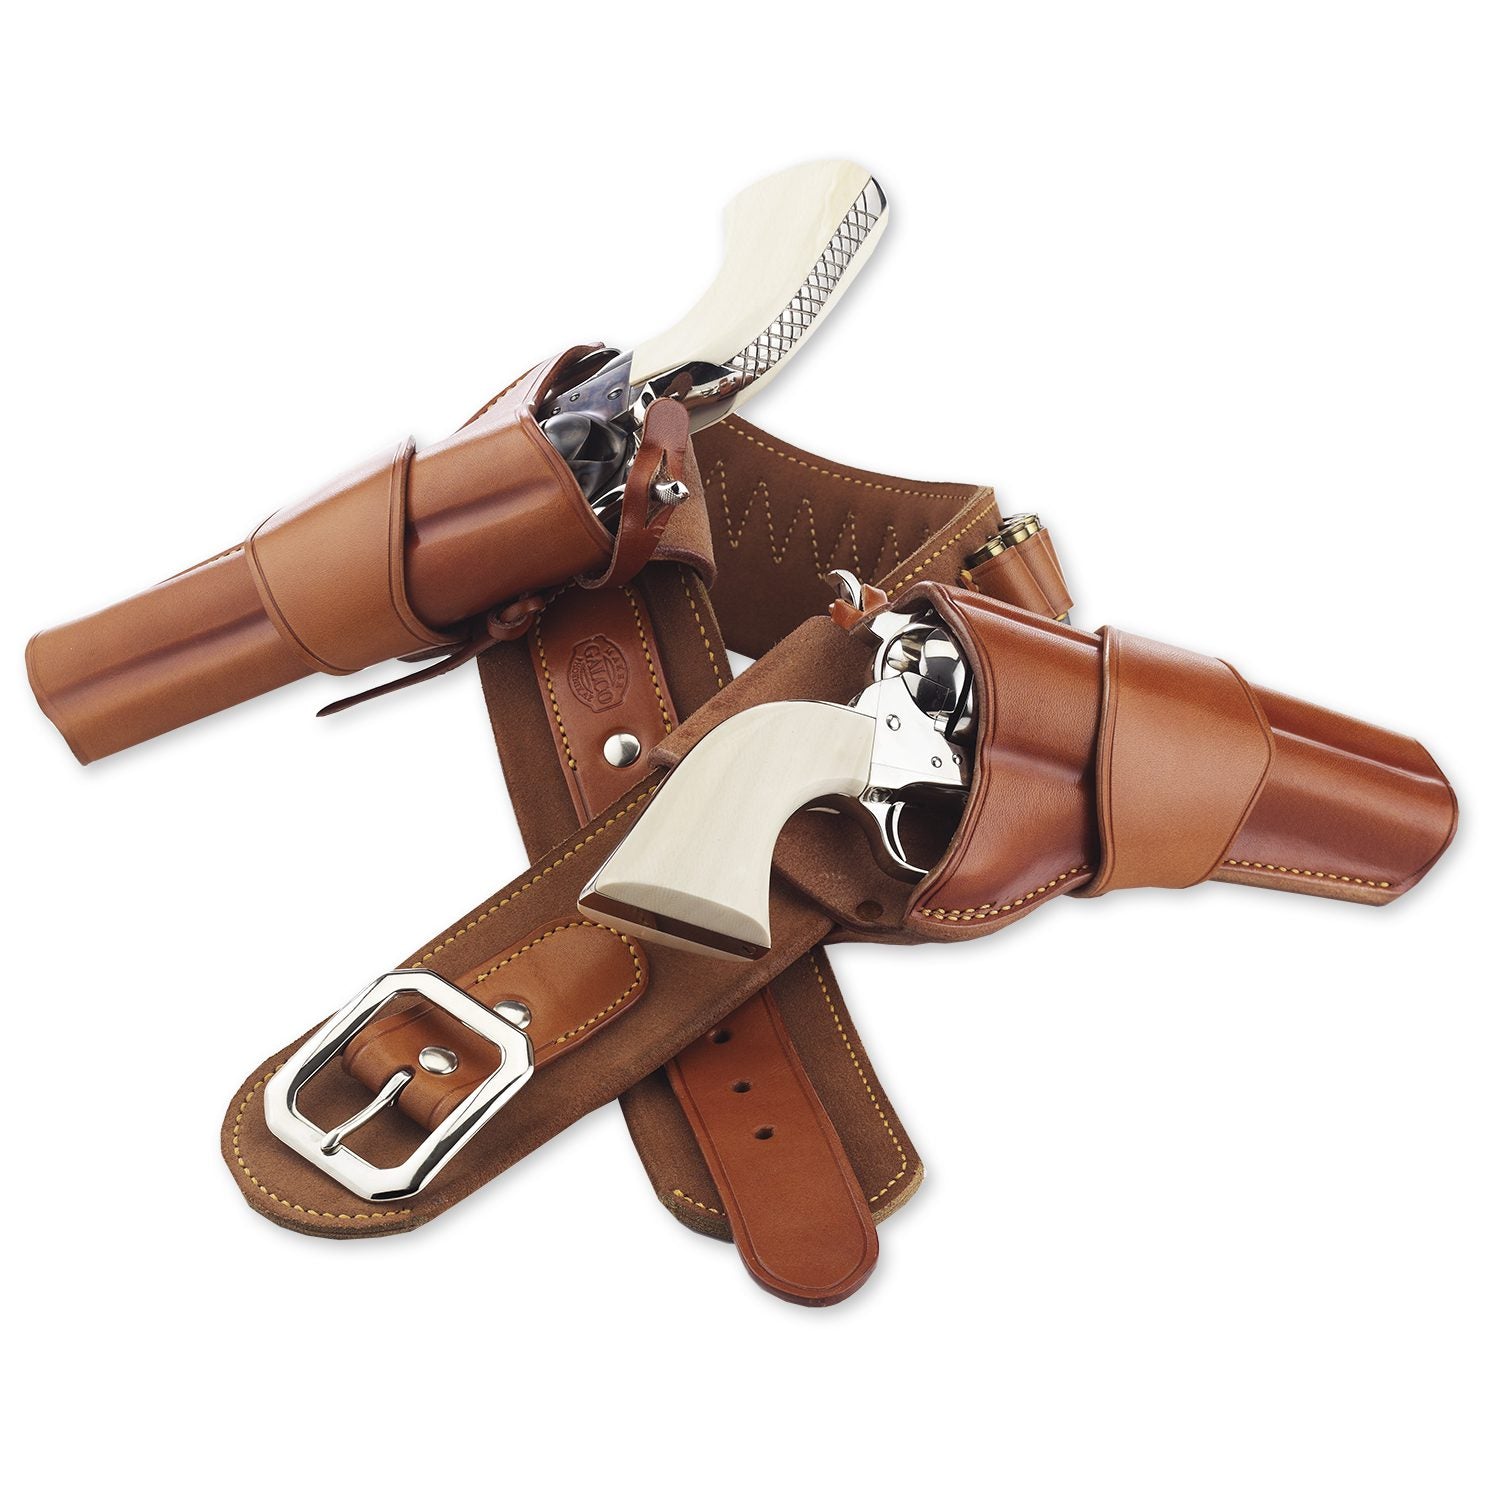 Galco Gunleather 1880's Holster Crossdraw - Tactical & Duty Gear